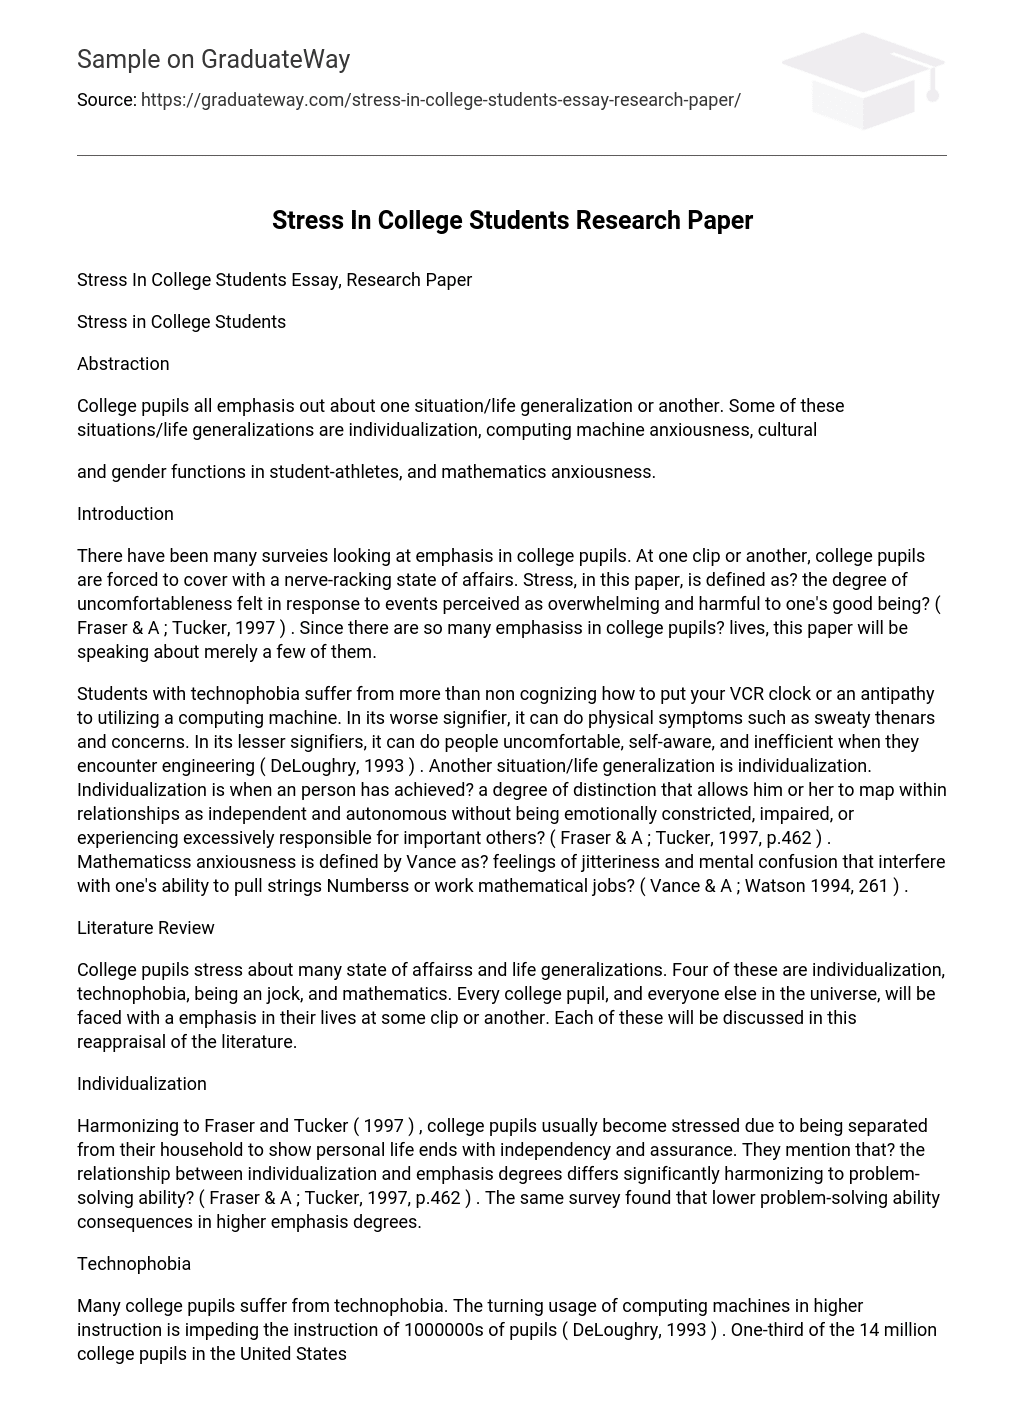 Stress In College Students Research Paper